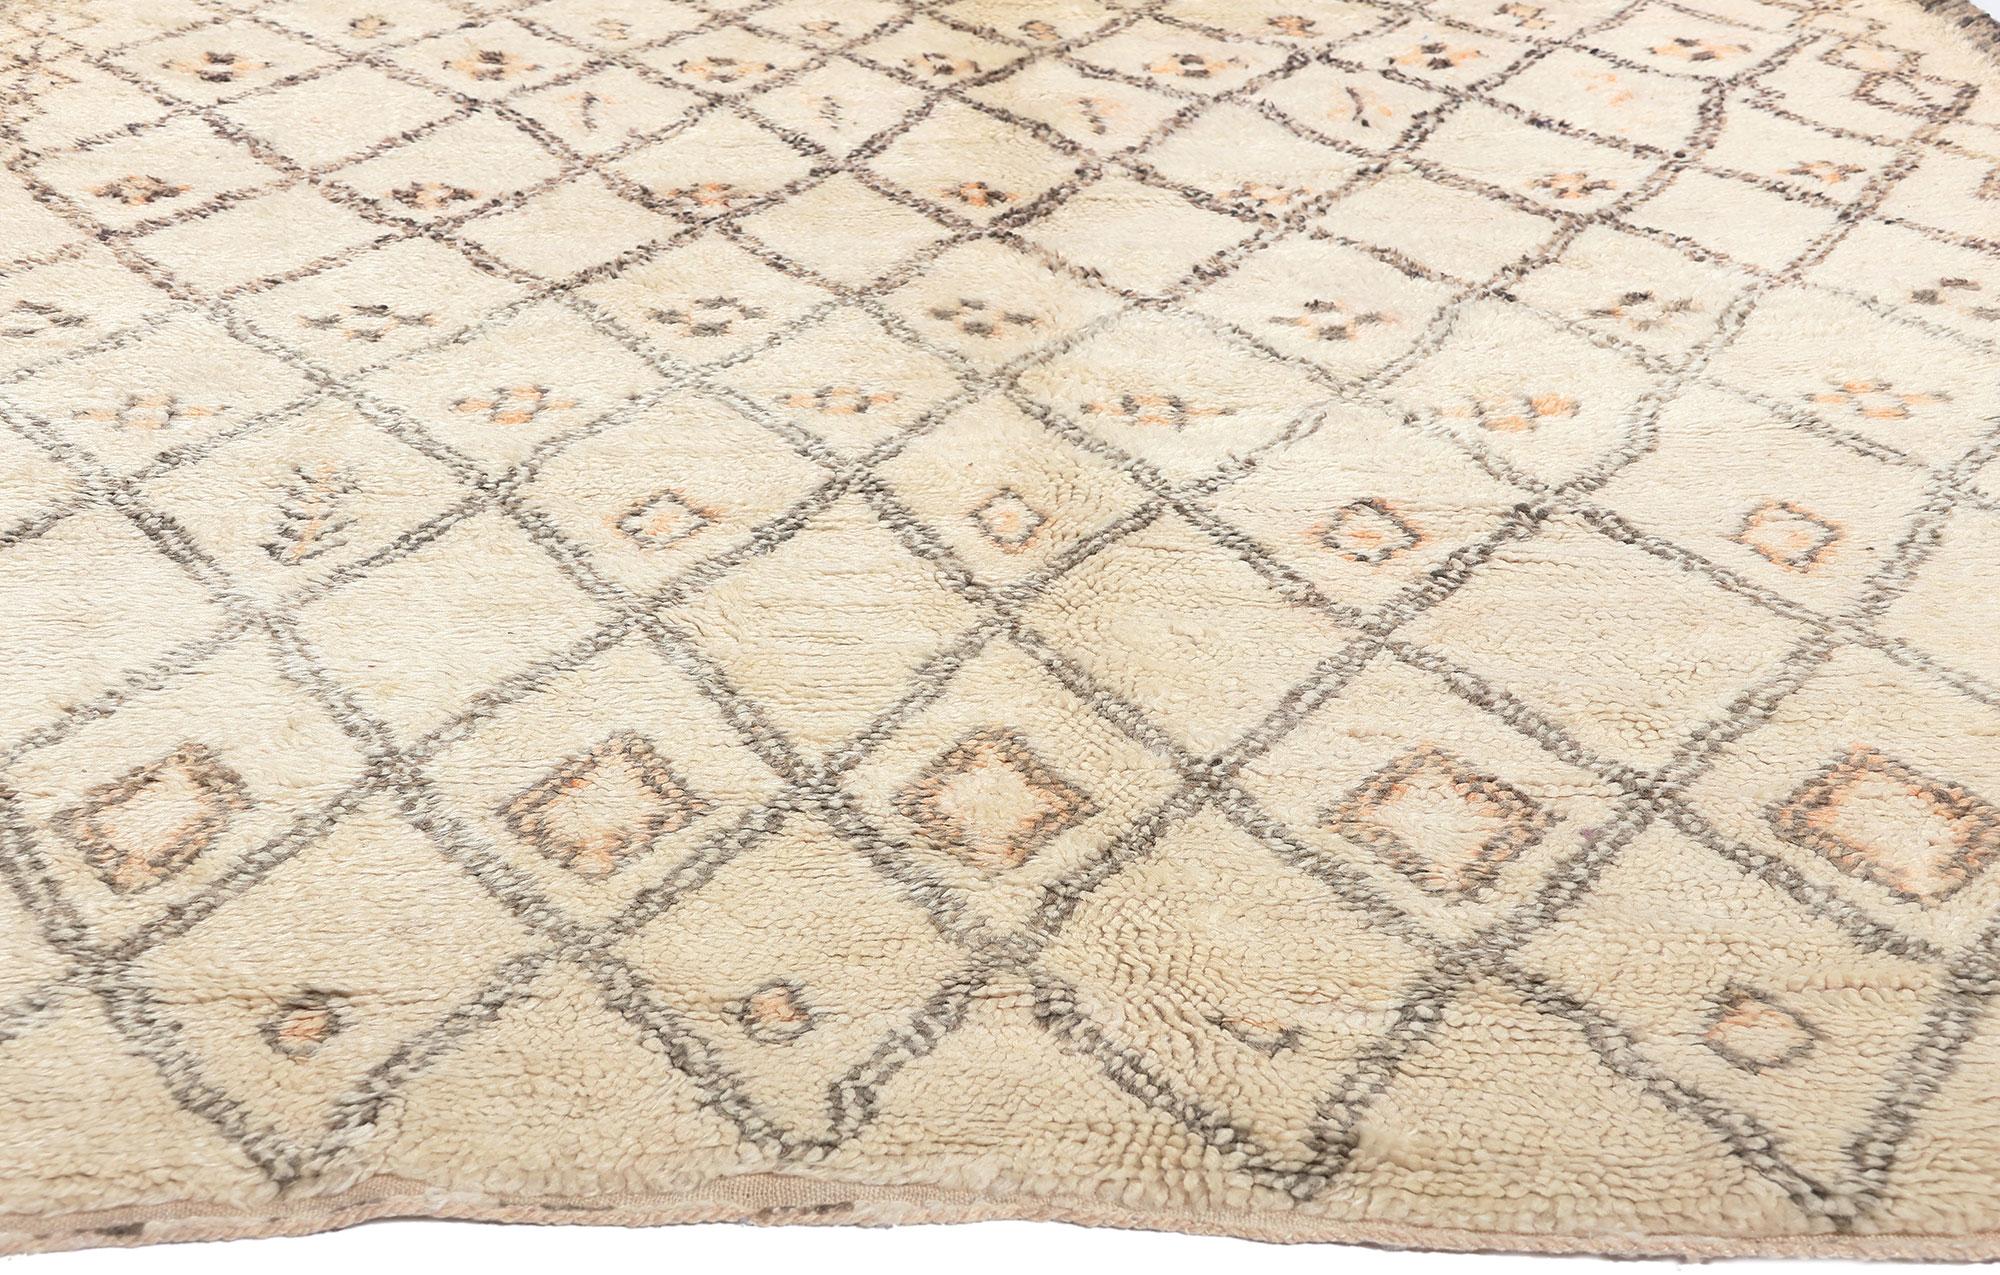 Hand-Knotted Vintage Moroccan Beni Ourain Rug, Midcentury Modern Style Meets Shibui For Sale